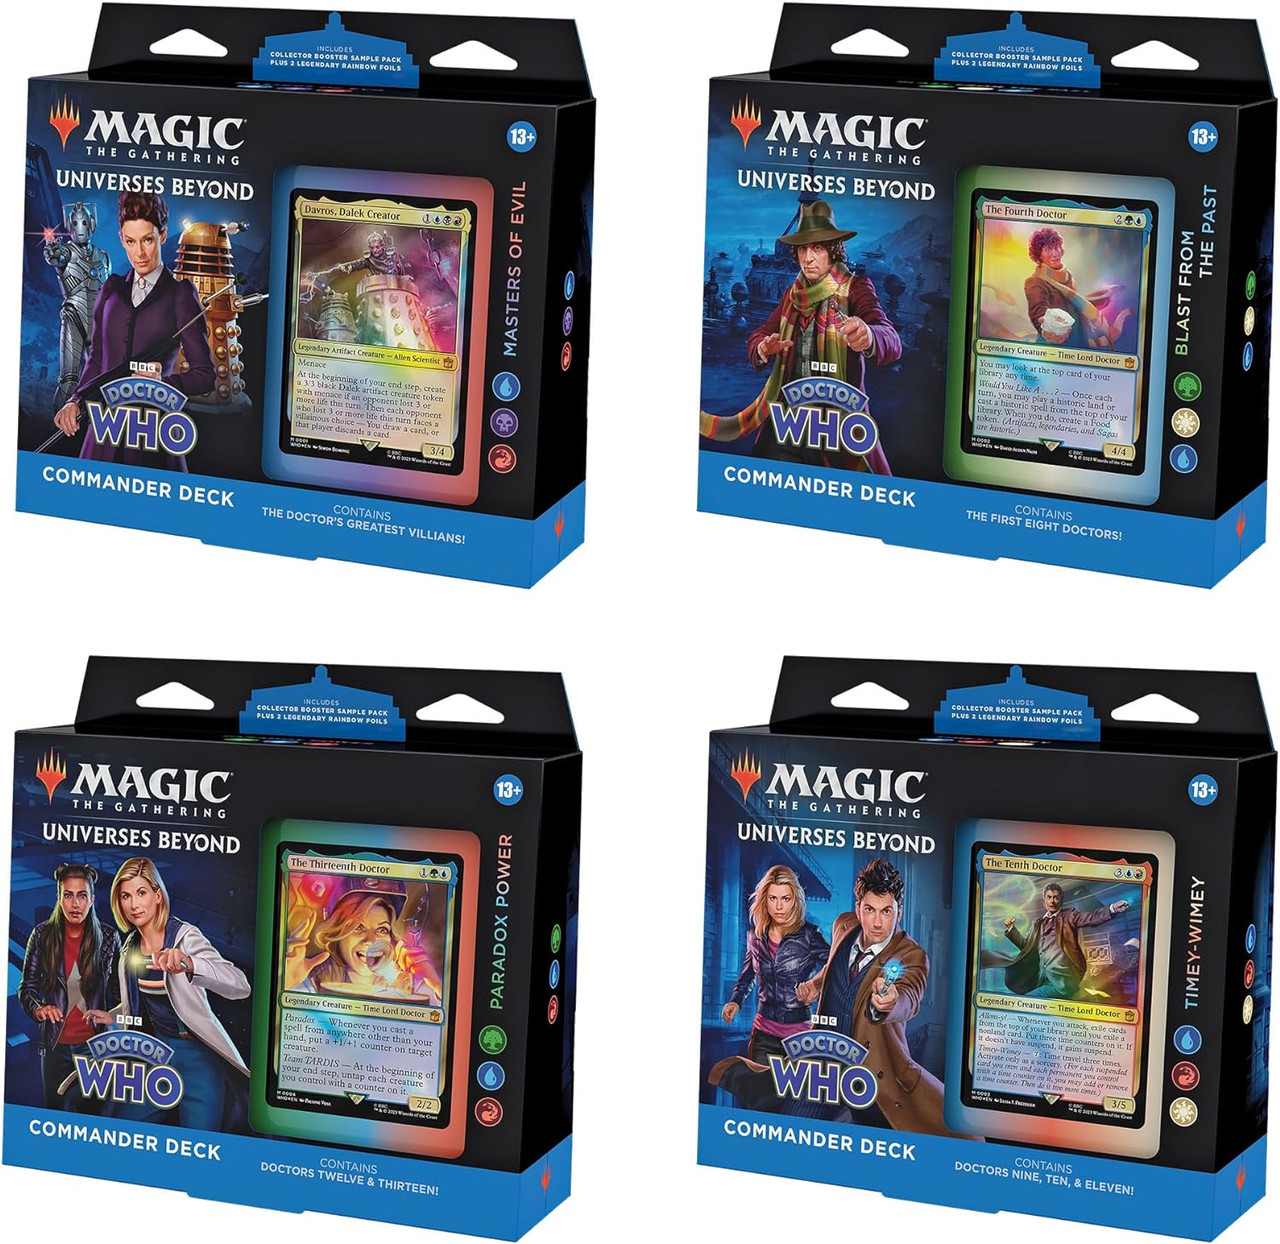 Magic The Gathering DOCTOR WHO Commander Deck - ALL FOUR SETS (4